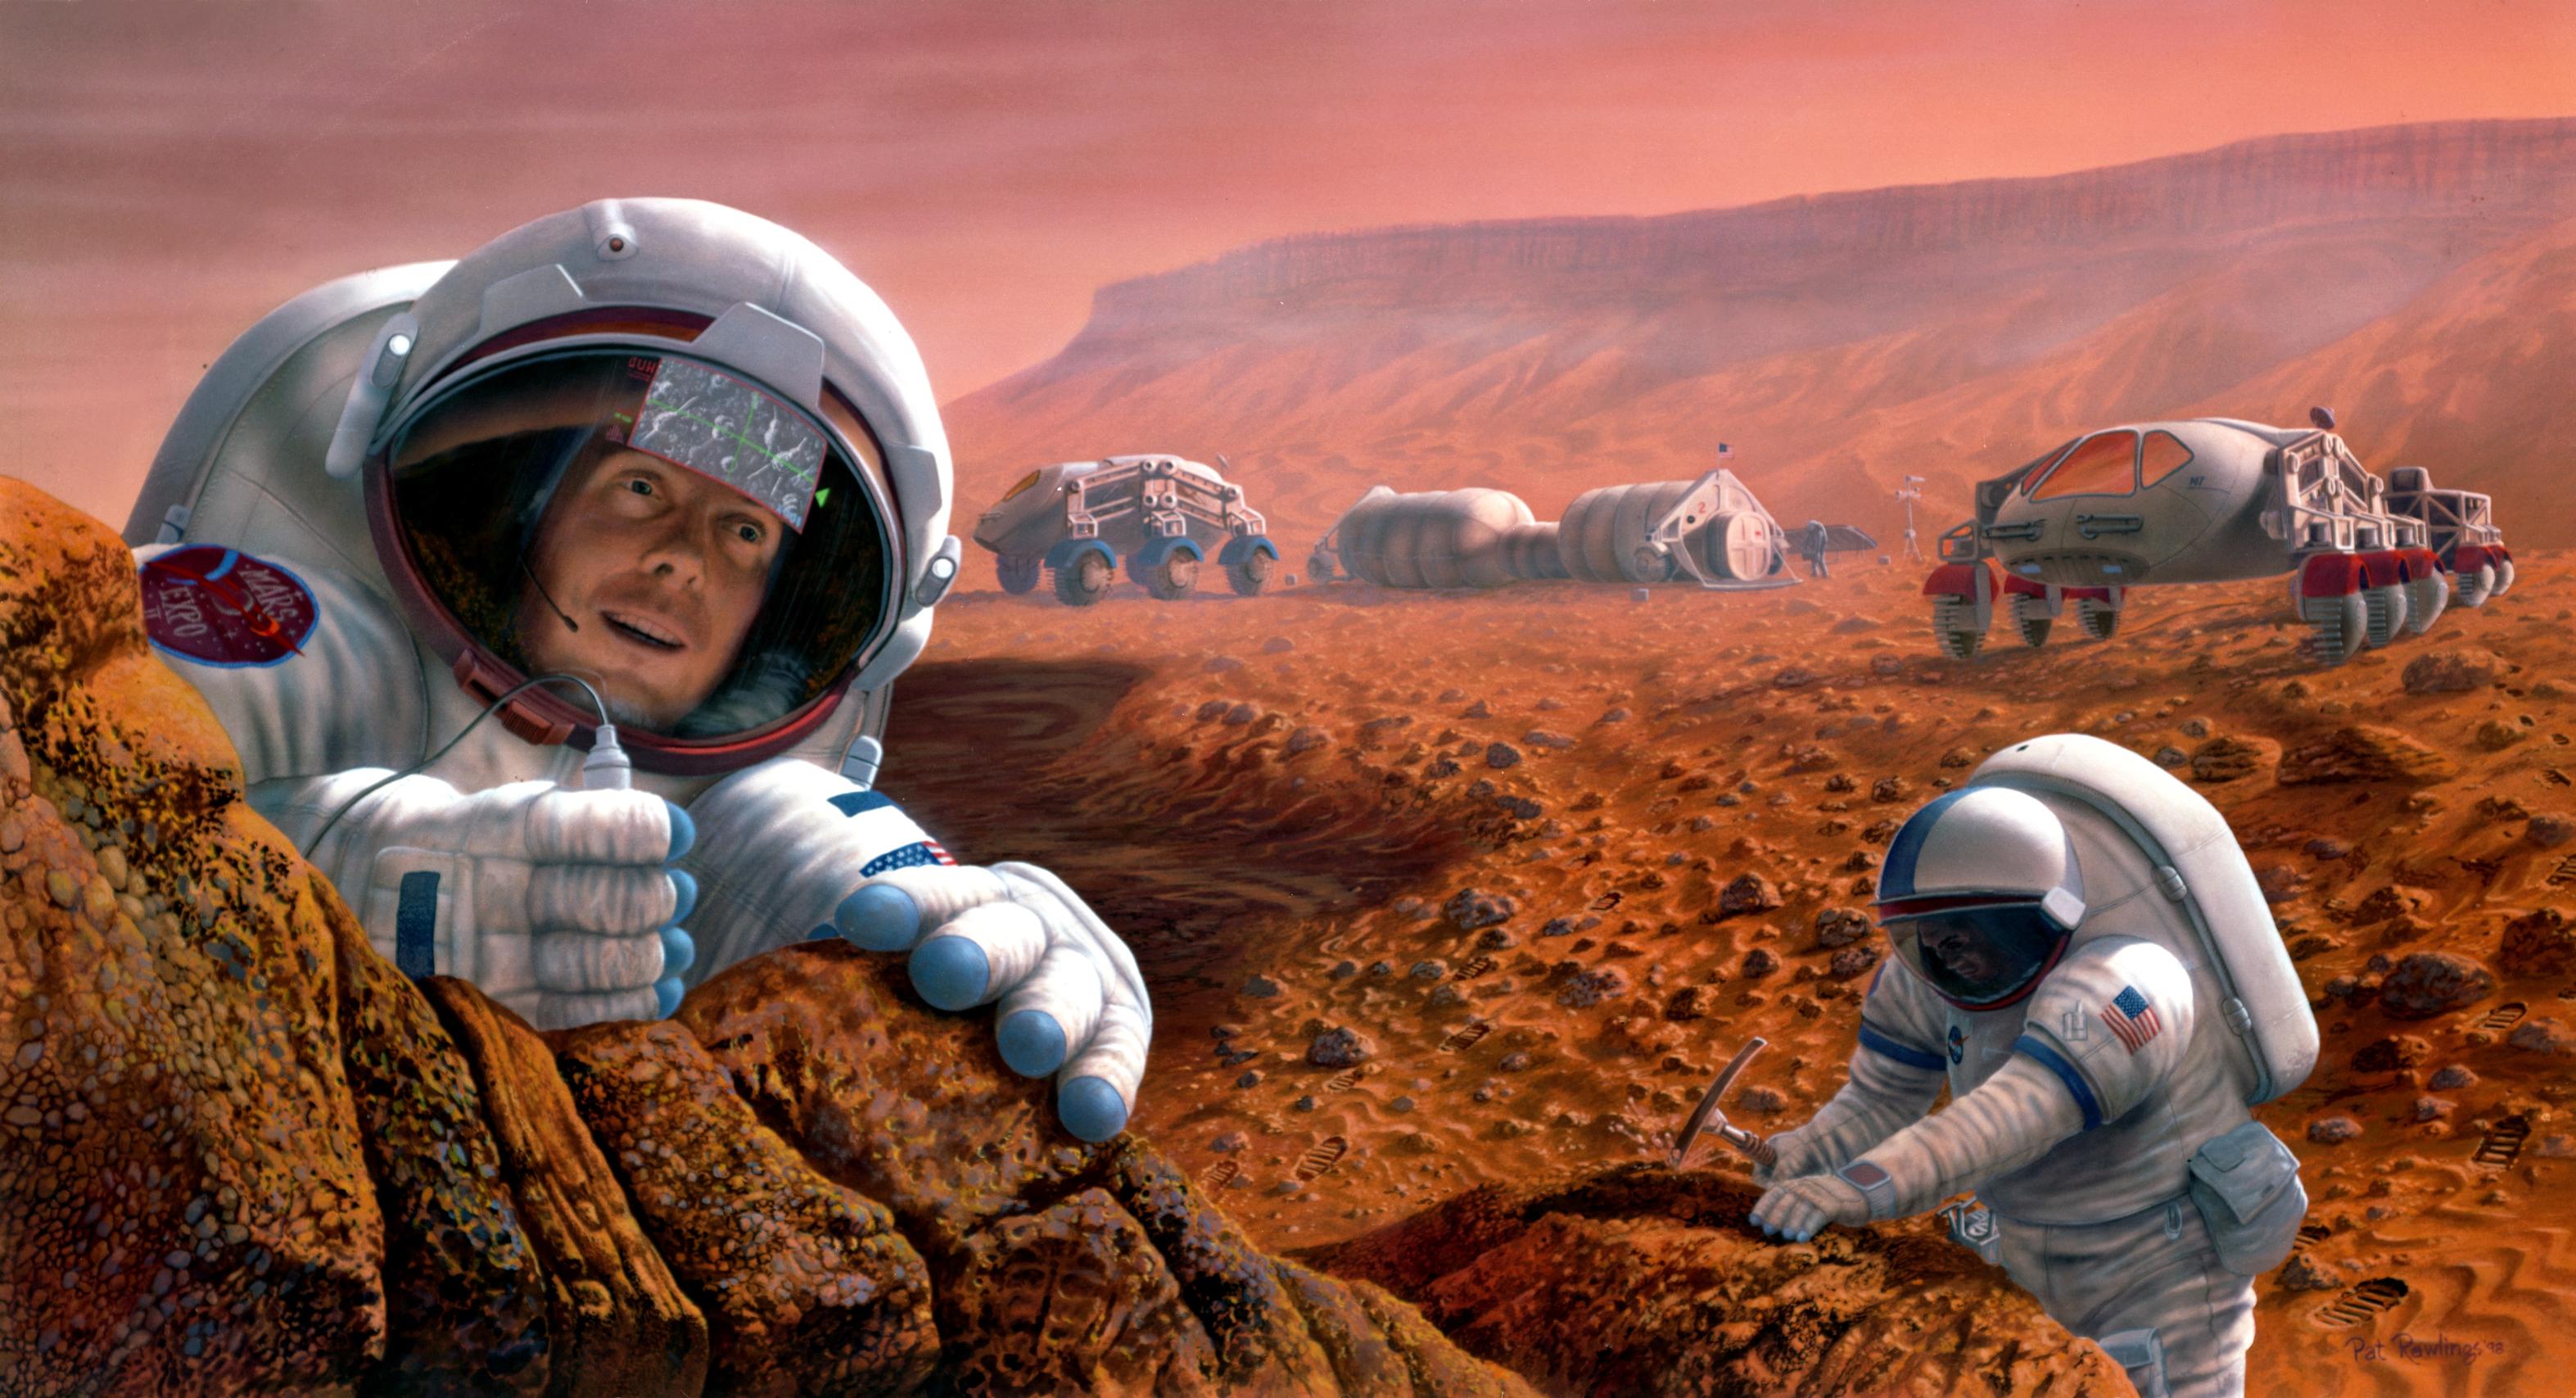 Two astronauts study a rock formation on Mars.  One is seen chipping away at a rock.  Two vehicles and an outpost are seen in the background.